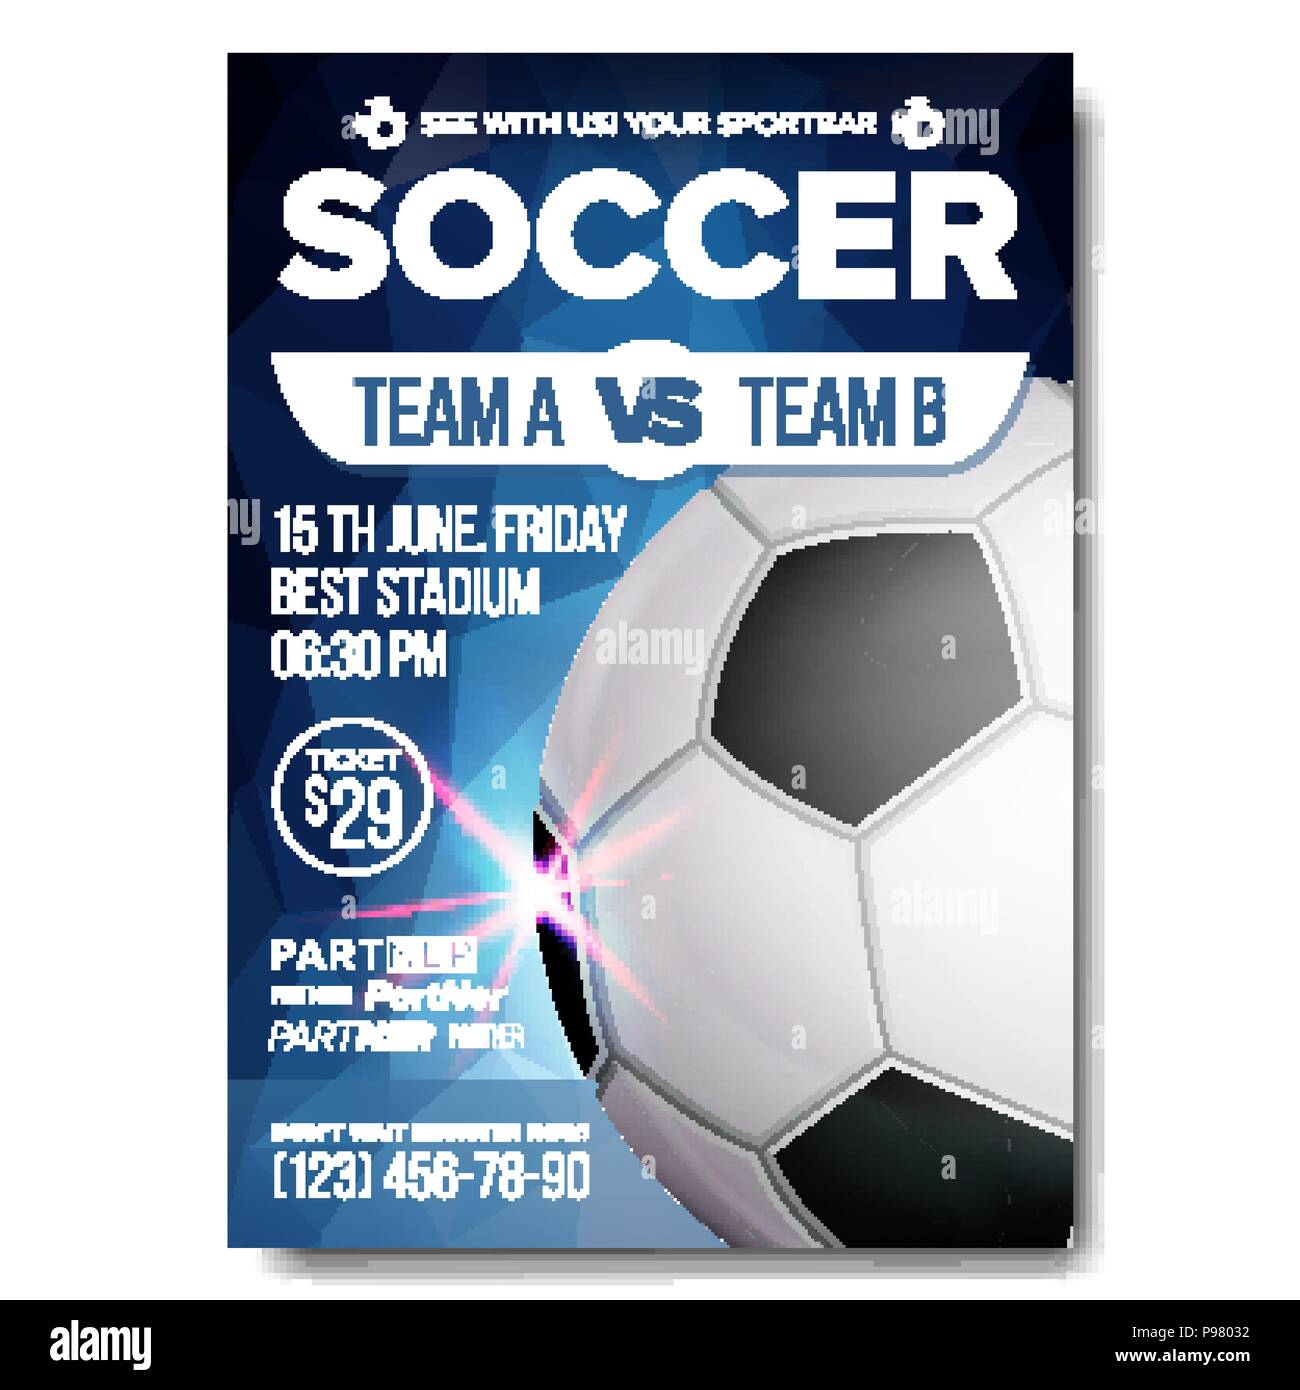 Soccer Poster Vector. Sports Bar Game Event Announcement. Football Banner Advertising. Professional League. Sport Invitation Template